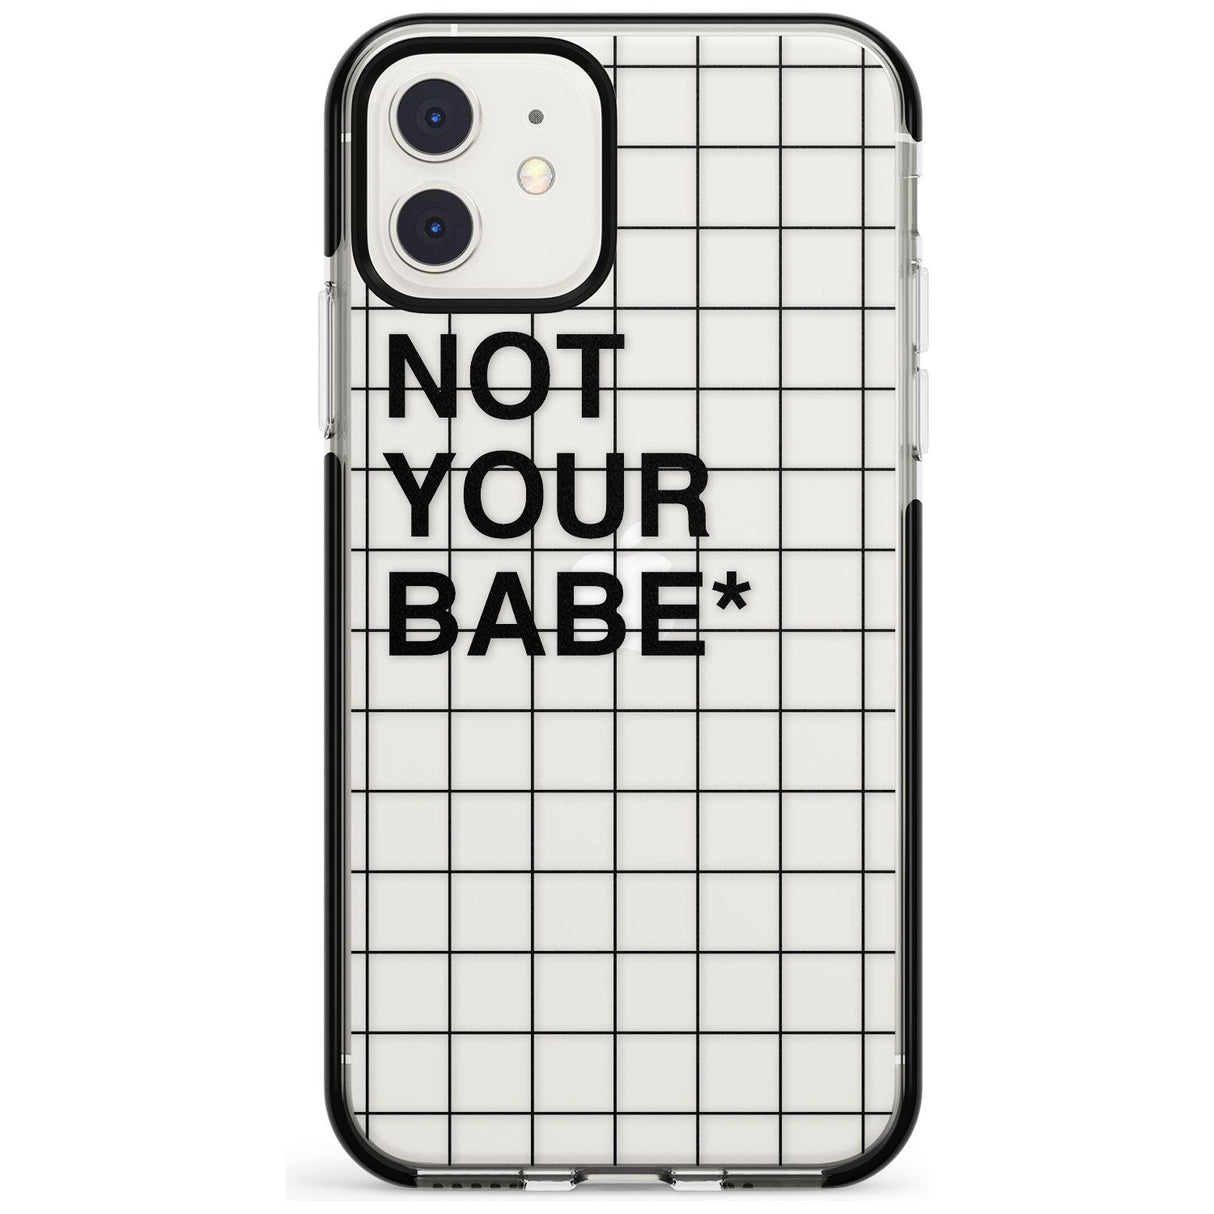 Grid Pattern Not Your Babe Black Impact Phone Case for iPhone 11